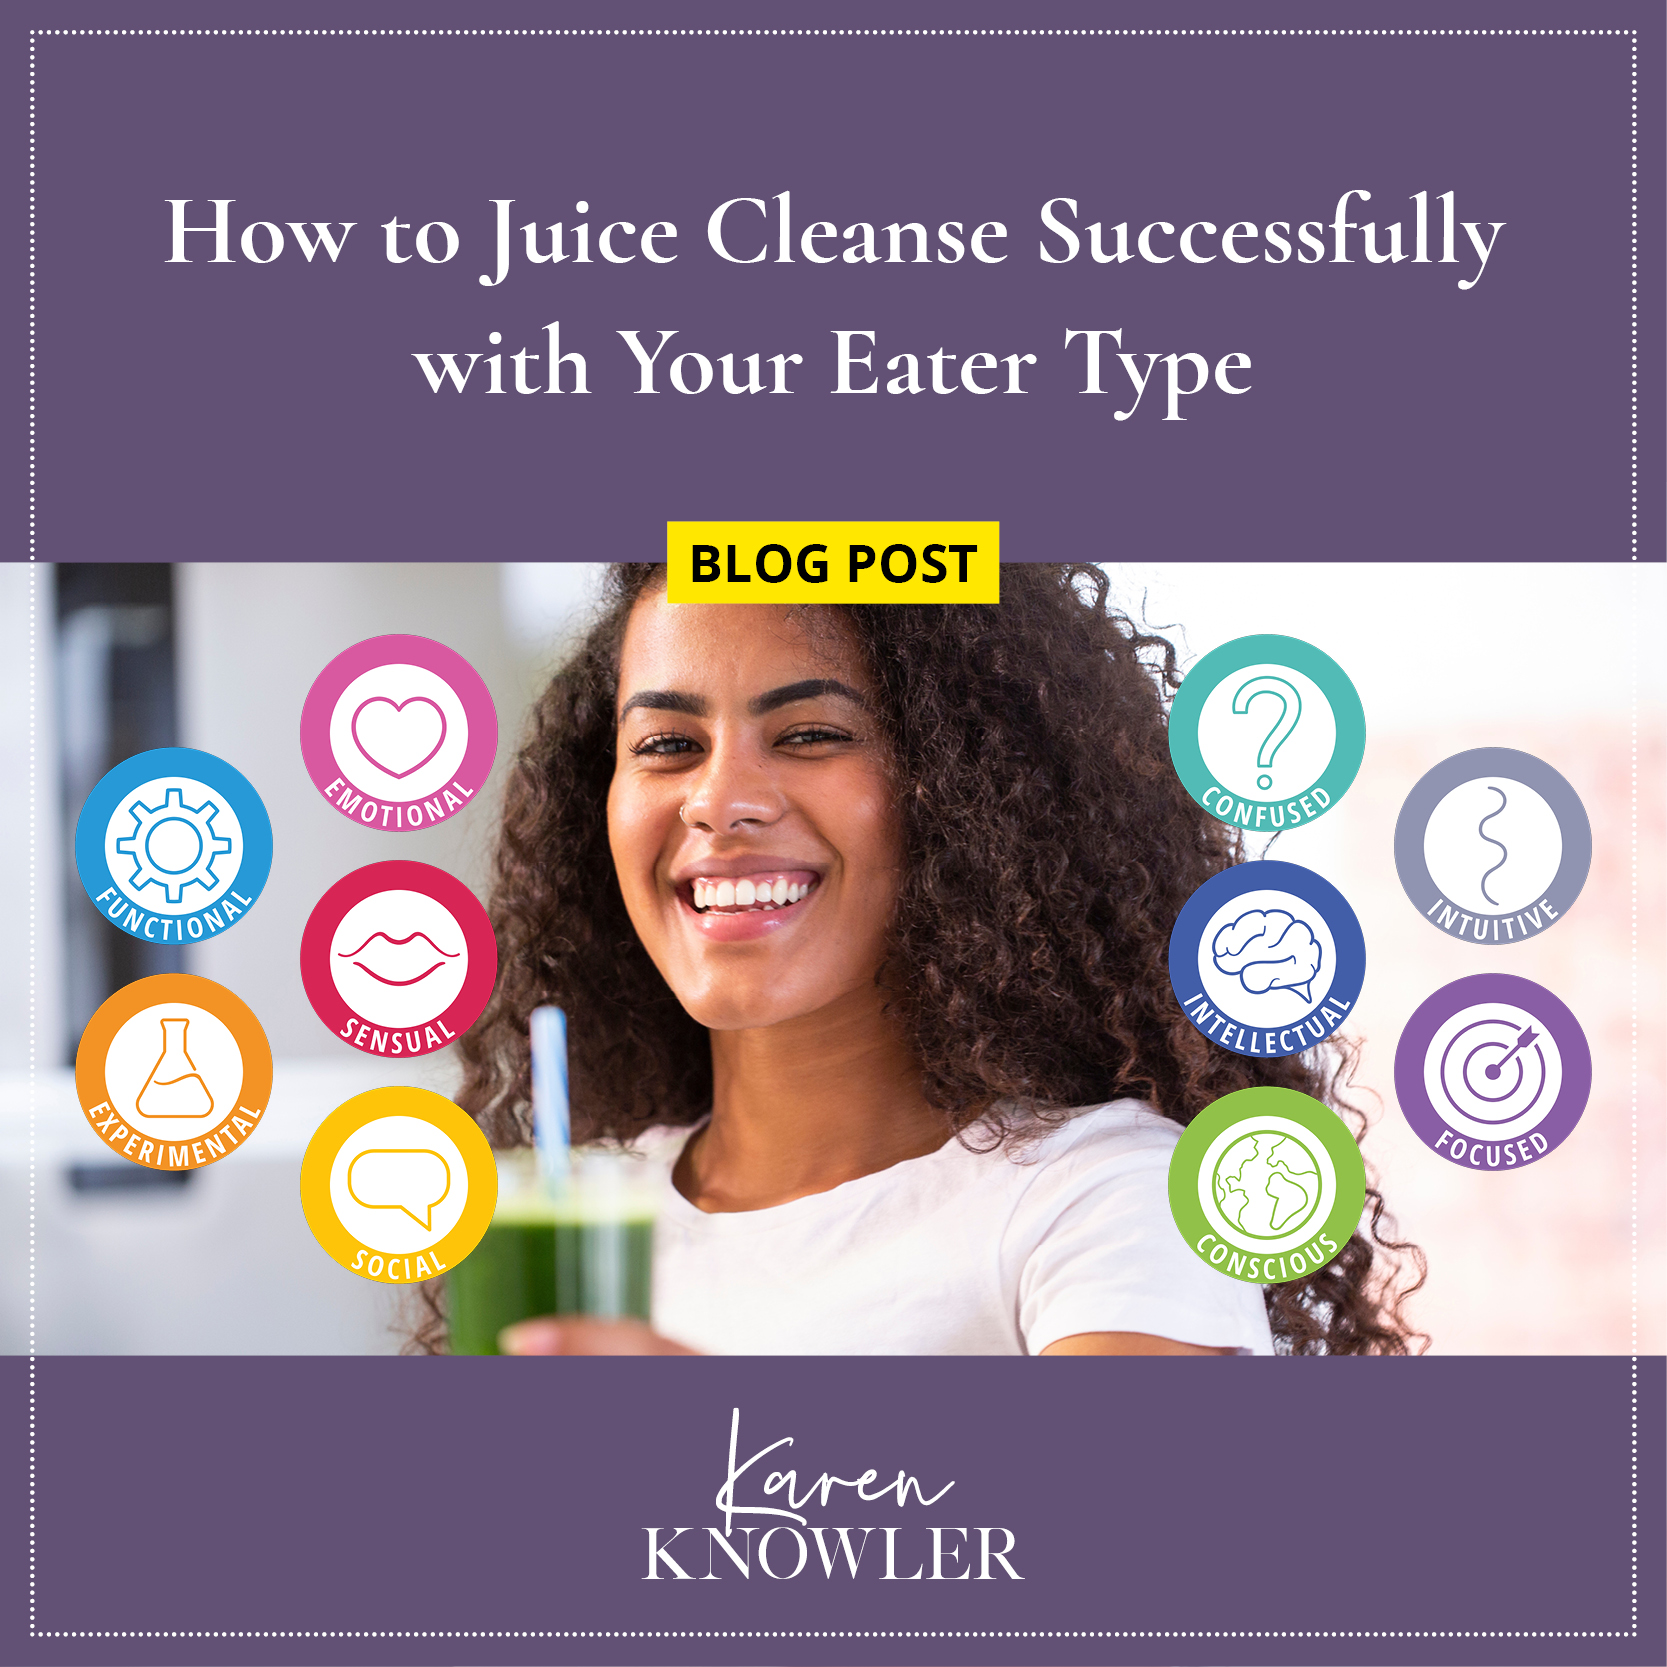 How To Juice Cleanse Successfully With Your Eater Type Karen Knowler